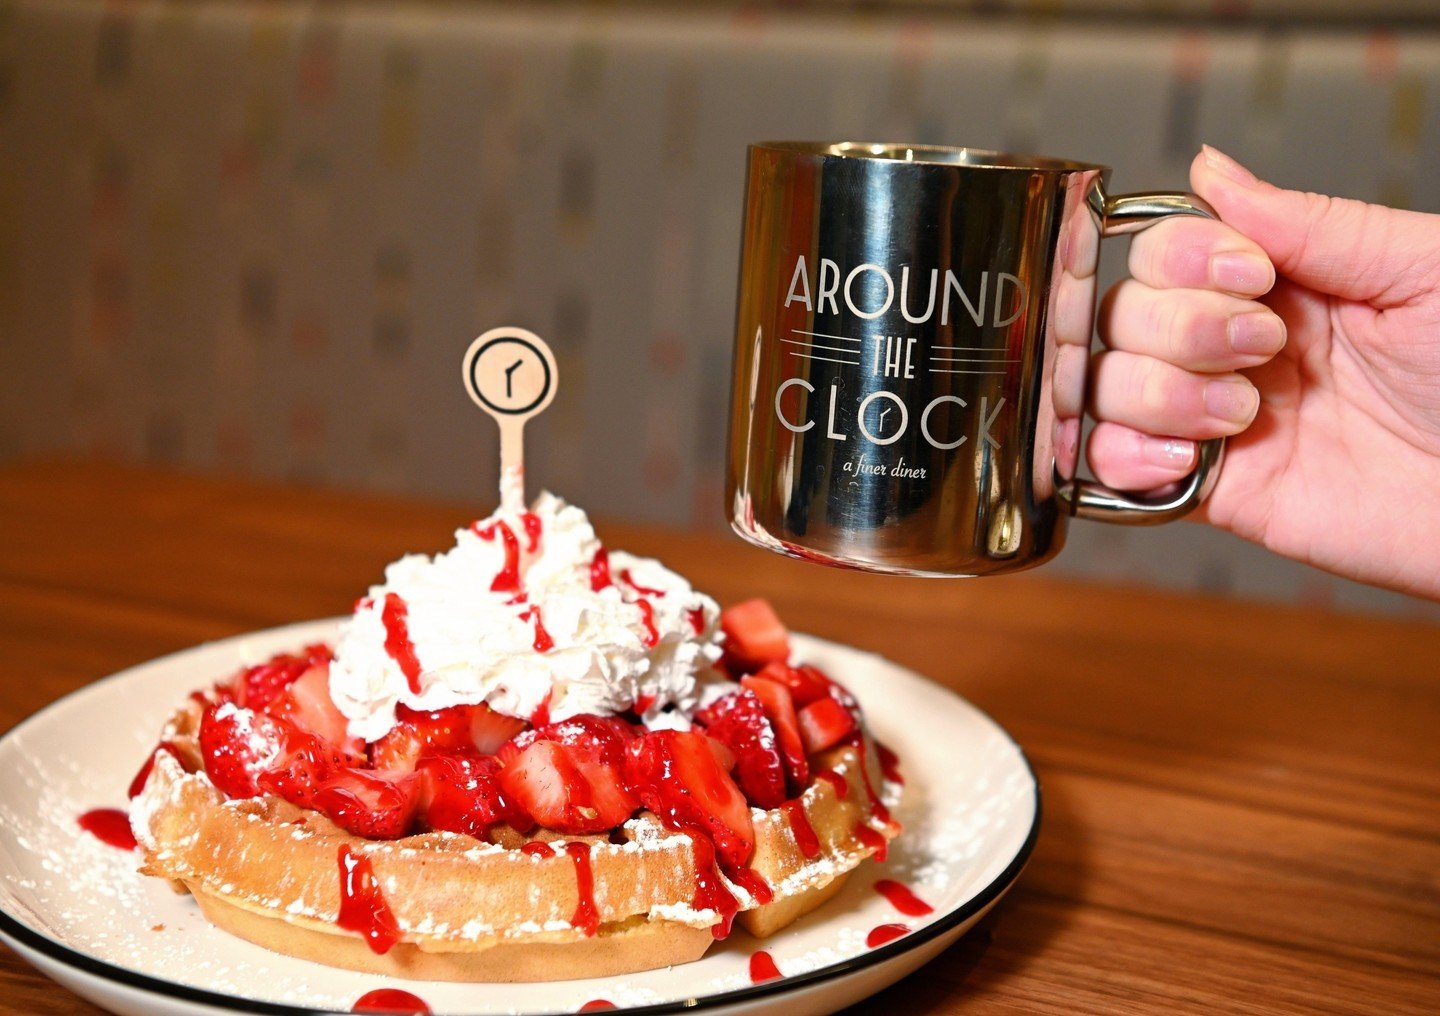 Start your day off the right way at Around the Clock Diner - as they say, breakfast is the most important meal of the day!⁠
☕️🍓🧇⁠
.⁠
.⁠
.⁠
#atcdiner #aroundtheclockdiner #diner #NJdiner #americandream #americandreammall #newopenings #newopeningsnj 